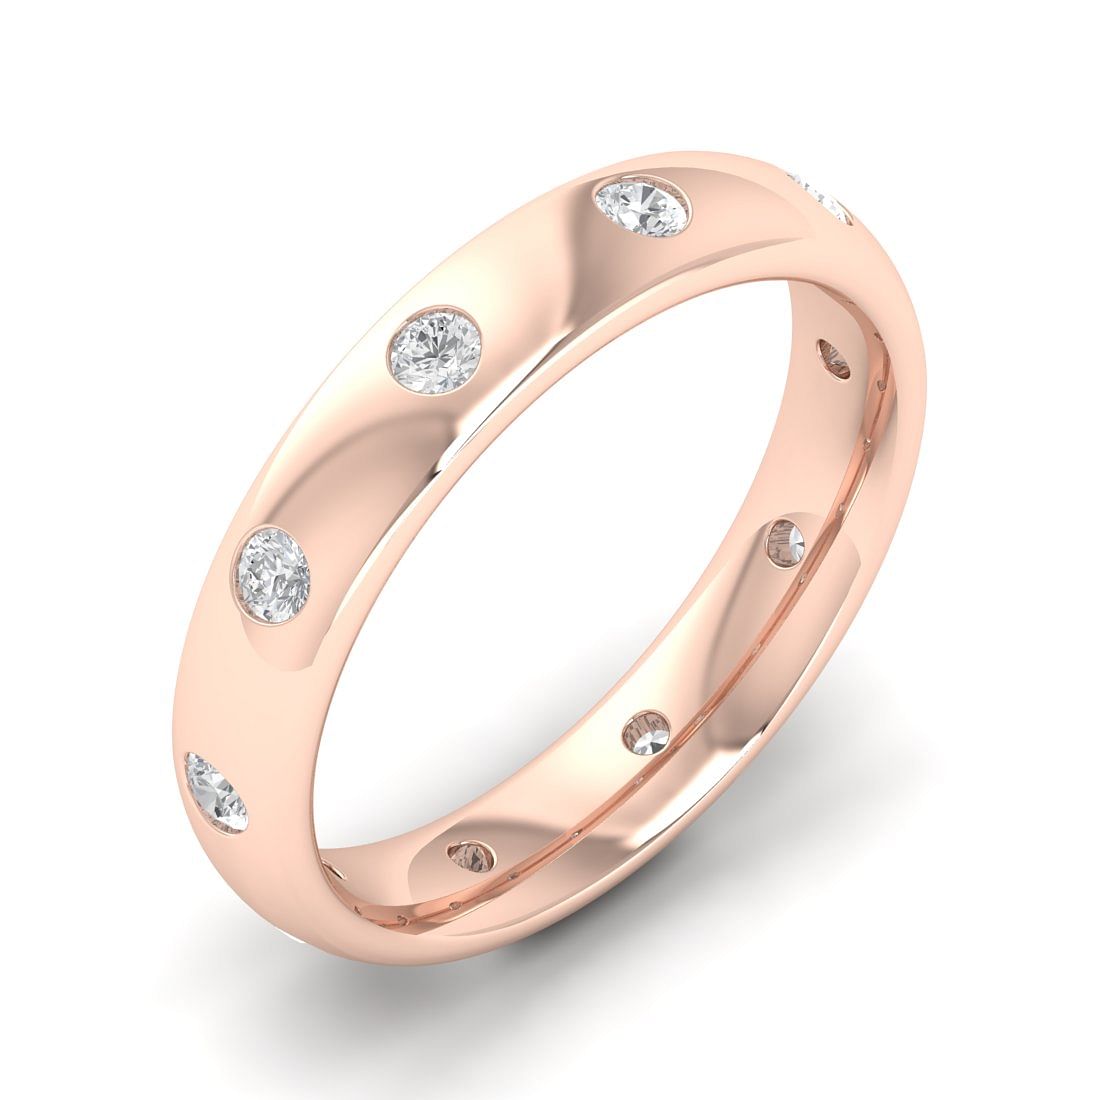 Wedding Diamond Ring With Rose Gold For Her